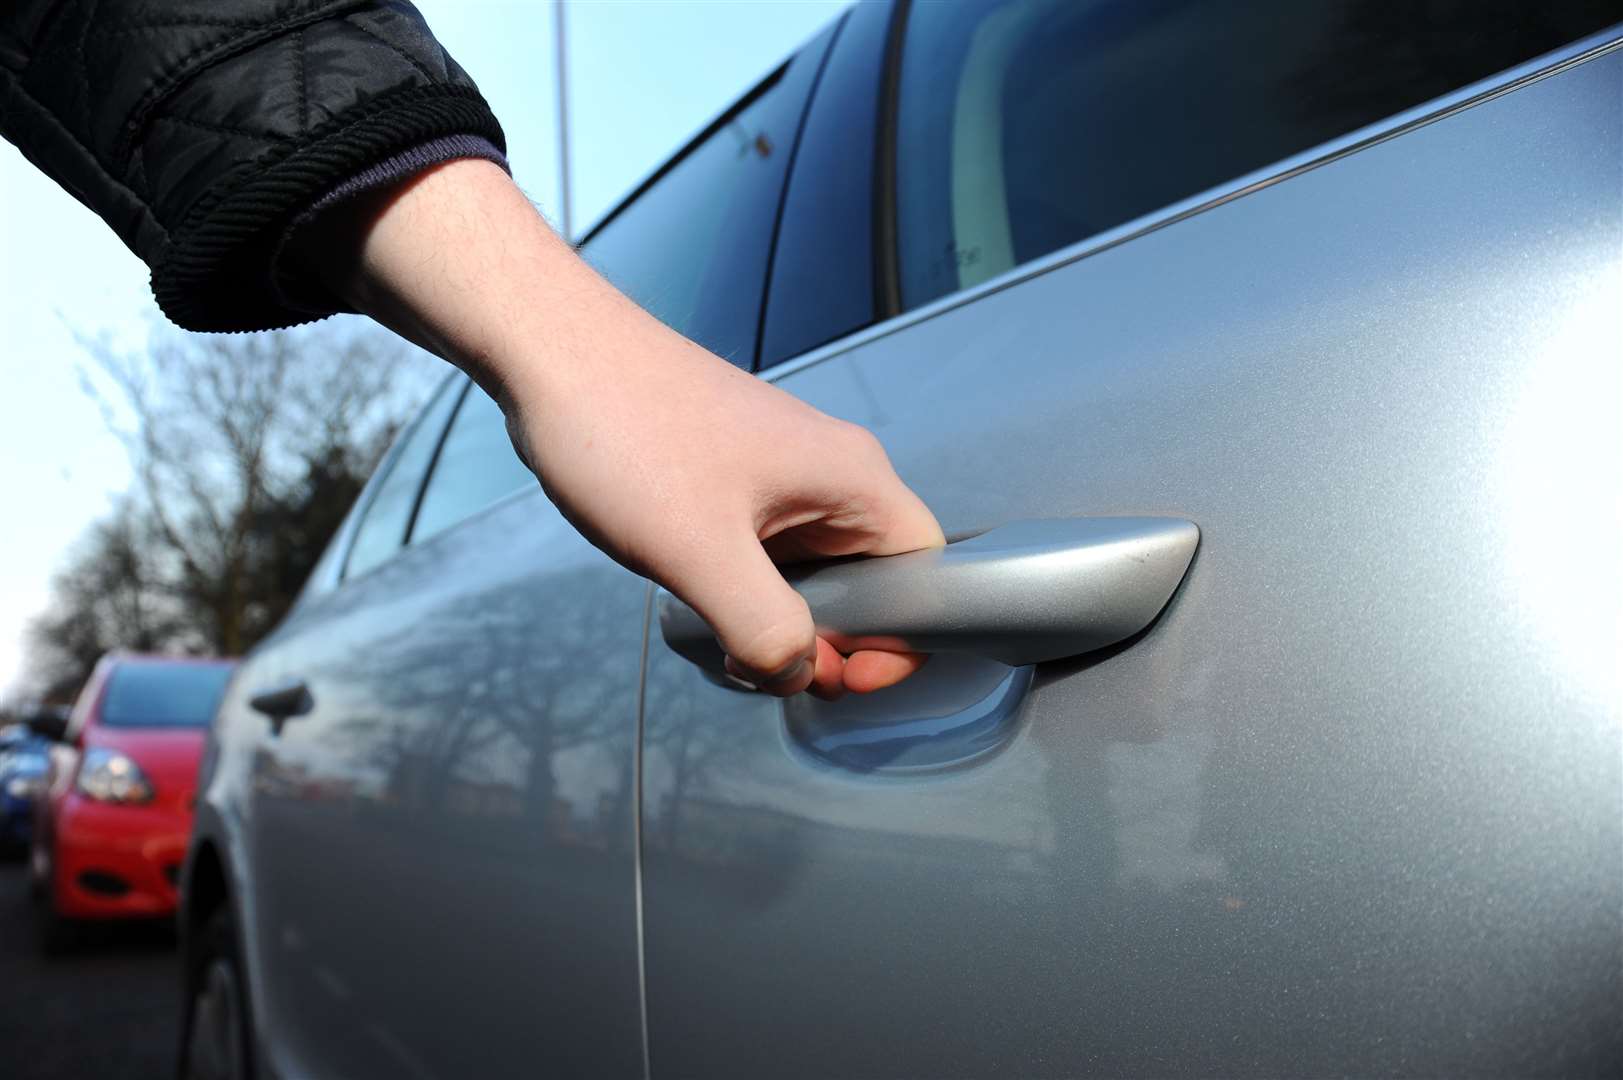 Do you check your car is locked? Image: iStock.